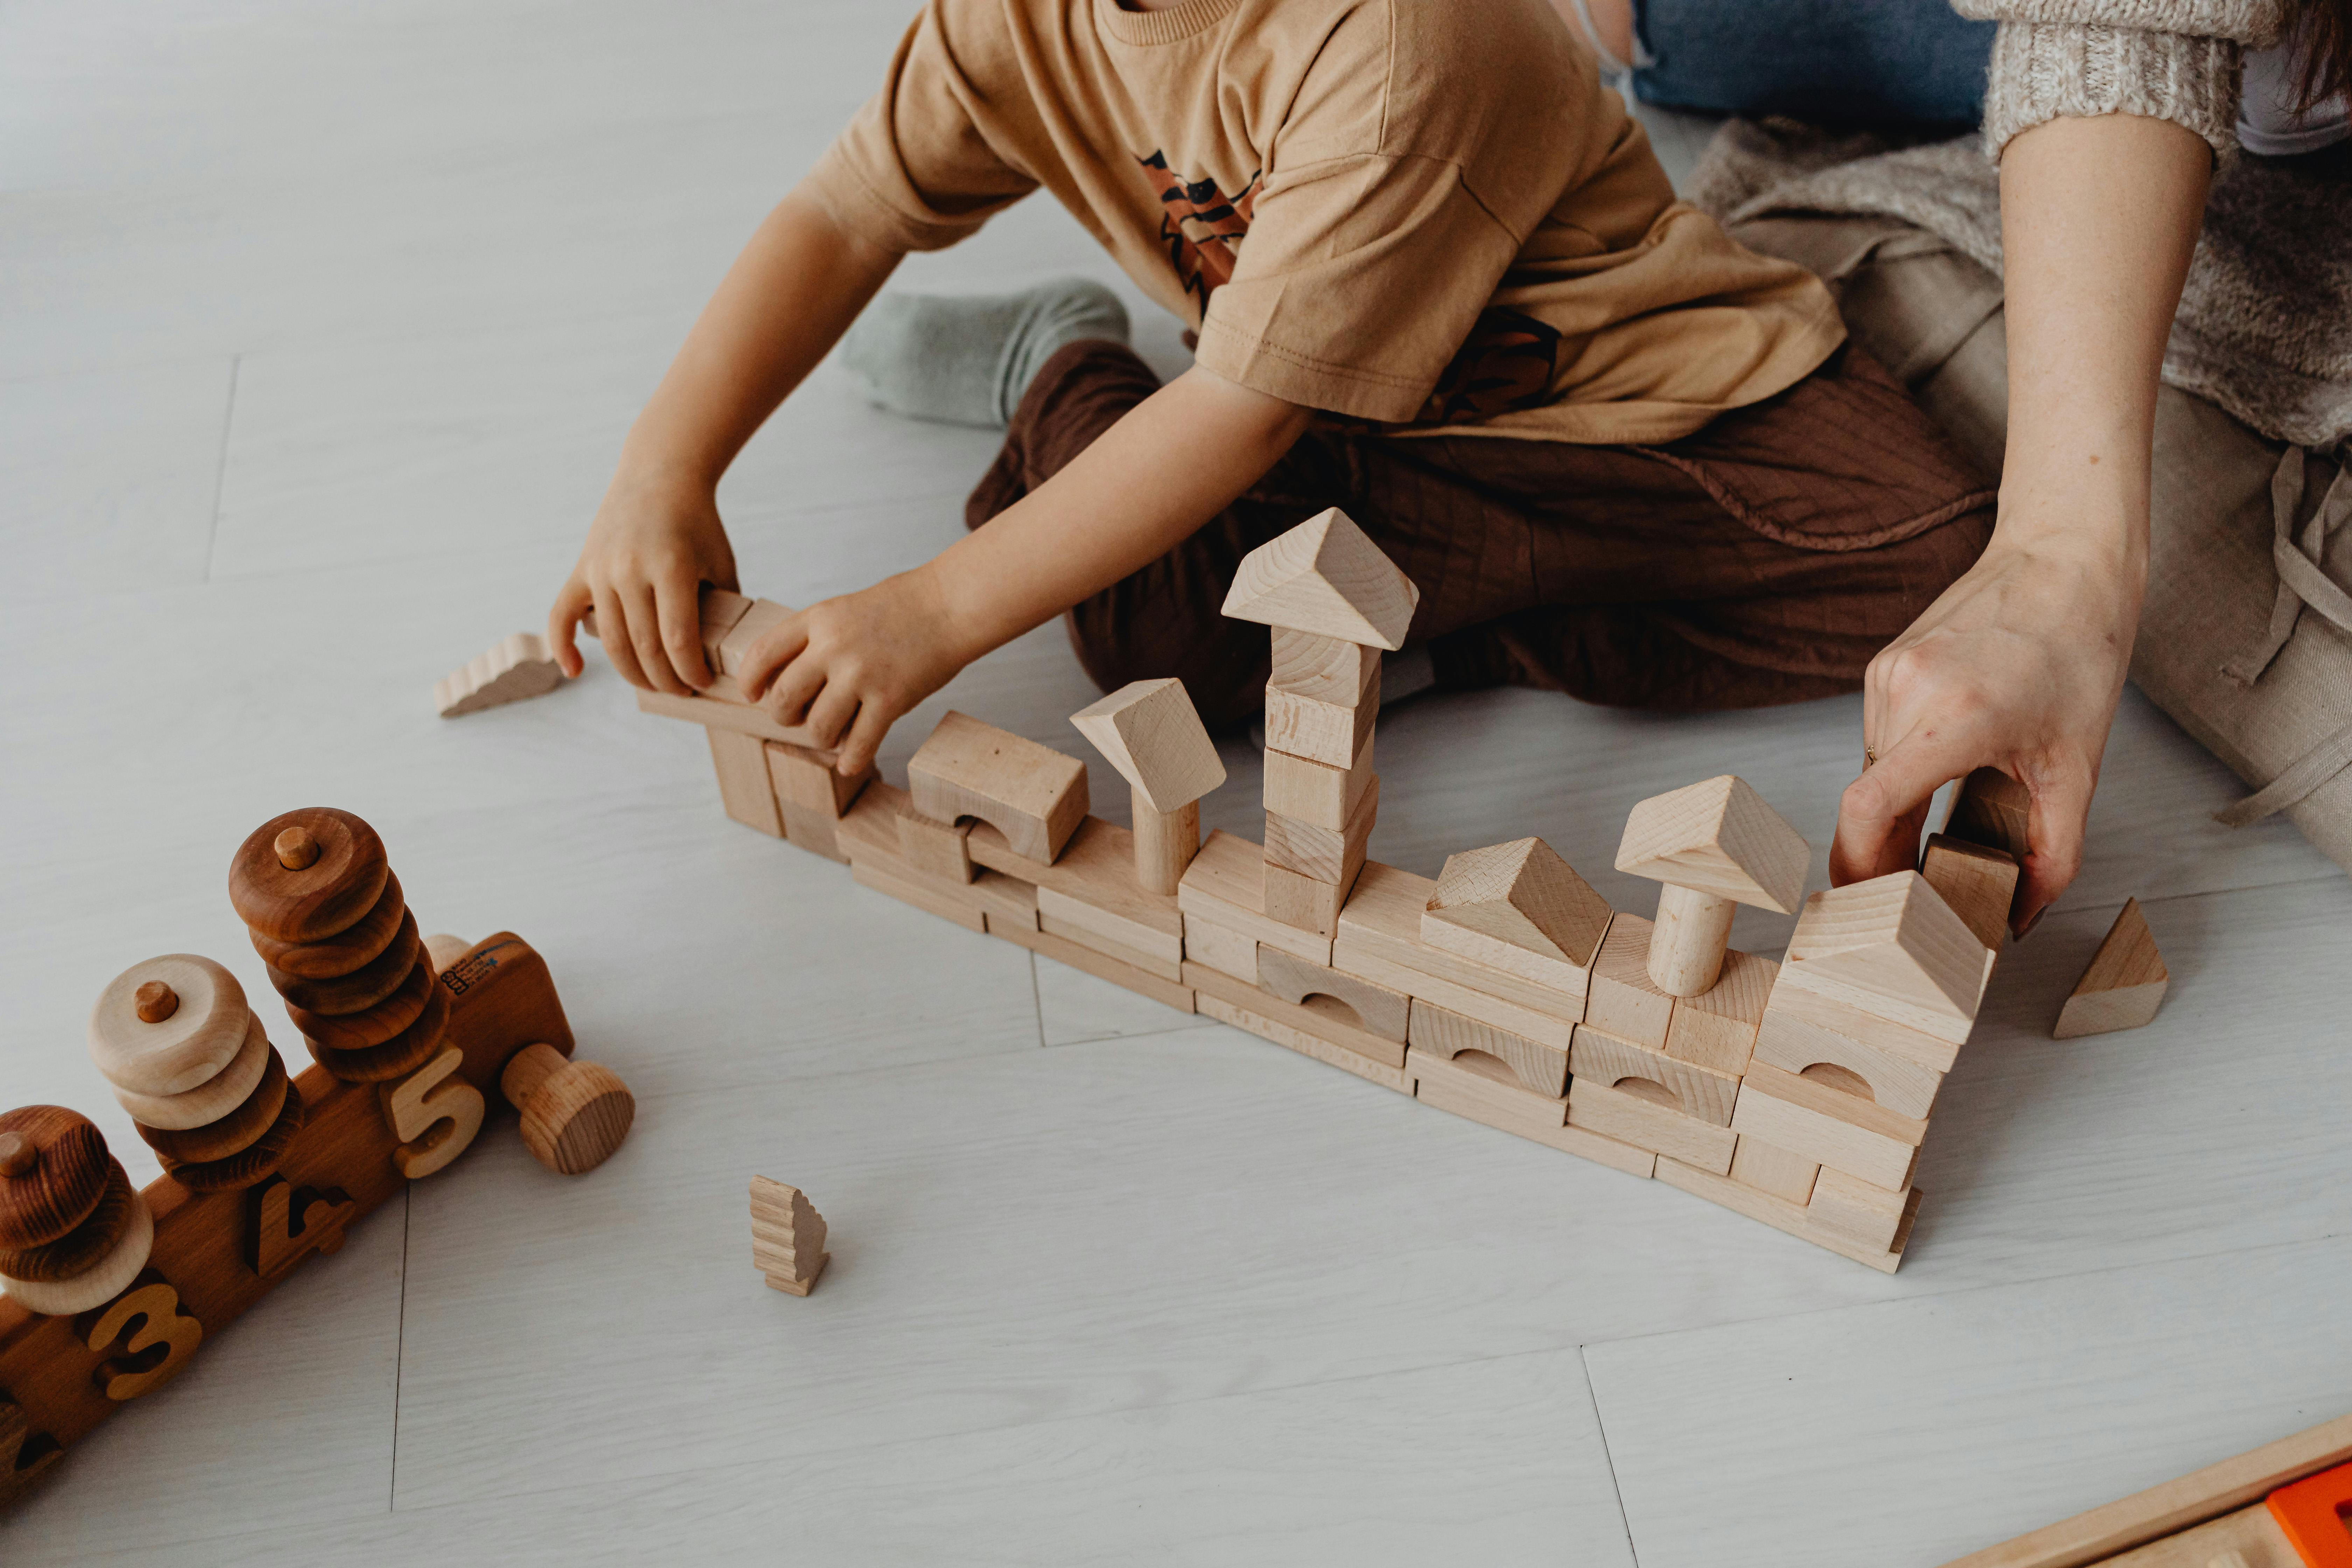 An adult playing with a baby and his toys | Source: Pexels